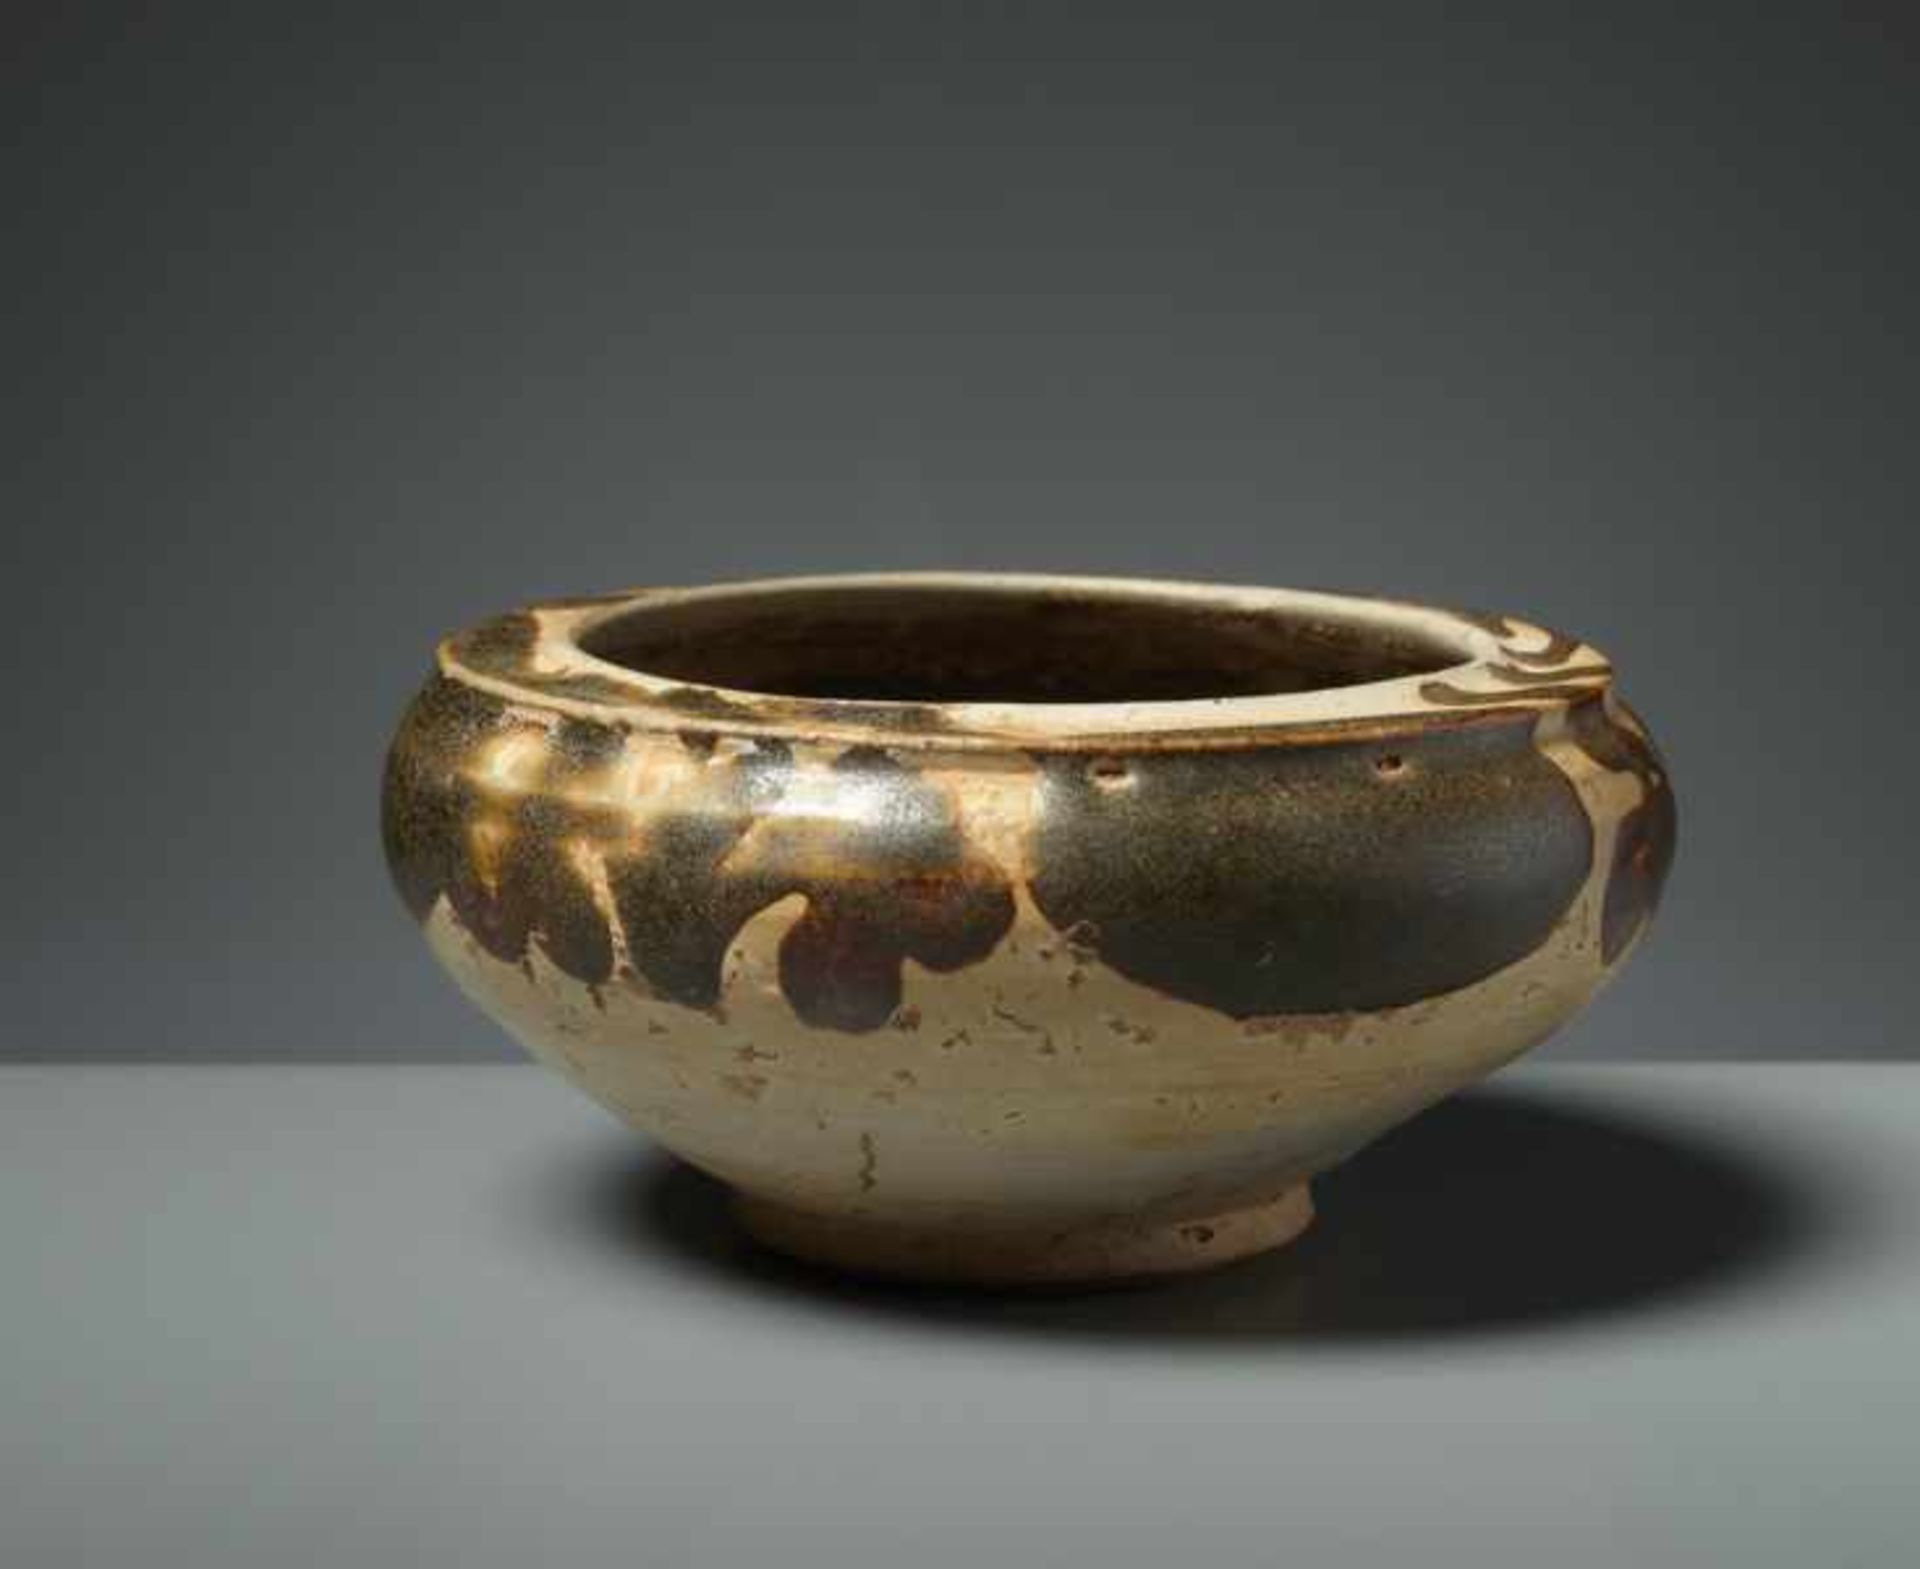 SMALL BOWL Glazed ceramic. China, Ming to Qing dynastyThe small bowl, a water container for the - Image 5 of 5